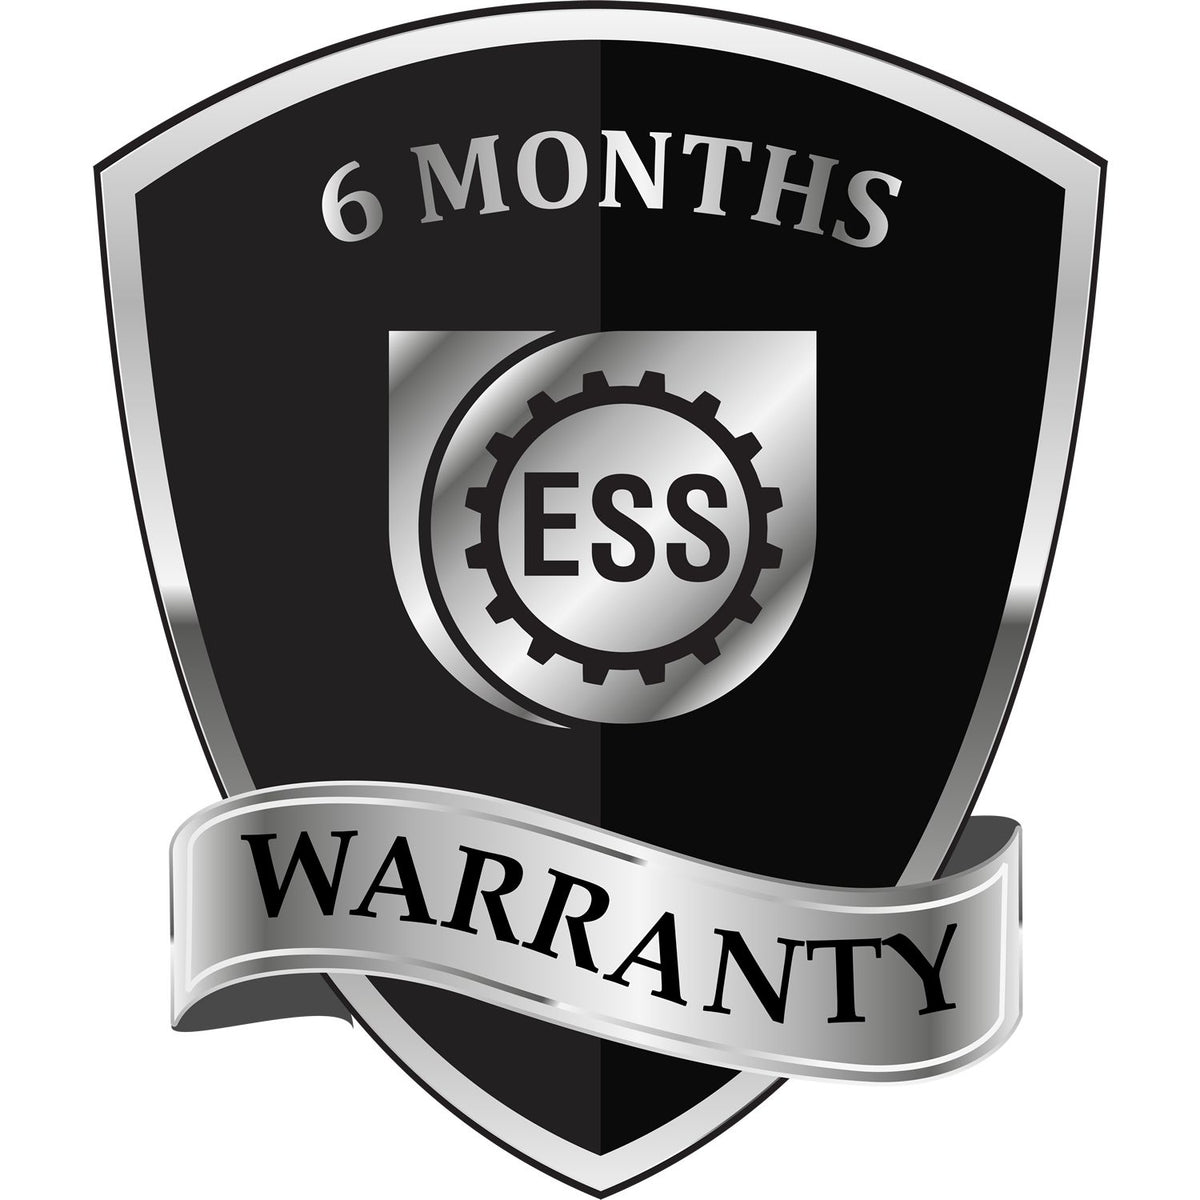 A badge or emblem showing a warranty icon for the Premium MaxLight Pre-Inked Guam Engineering Stamp